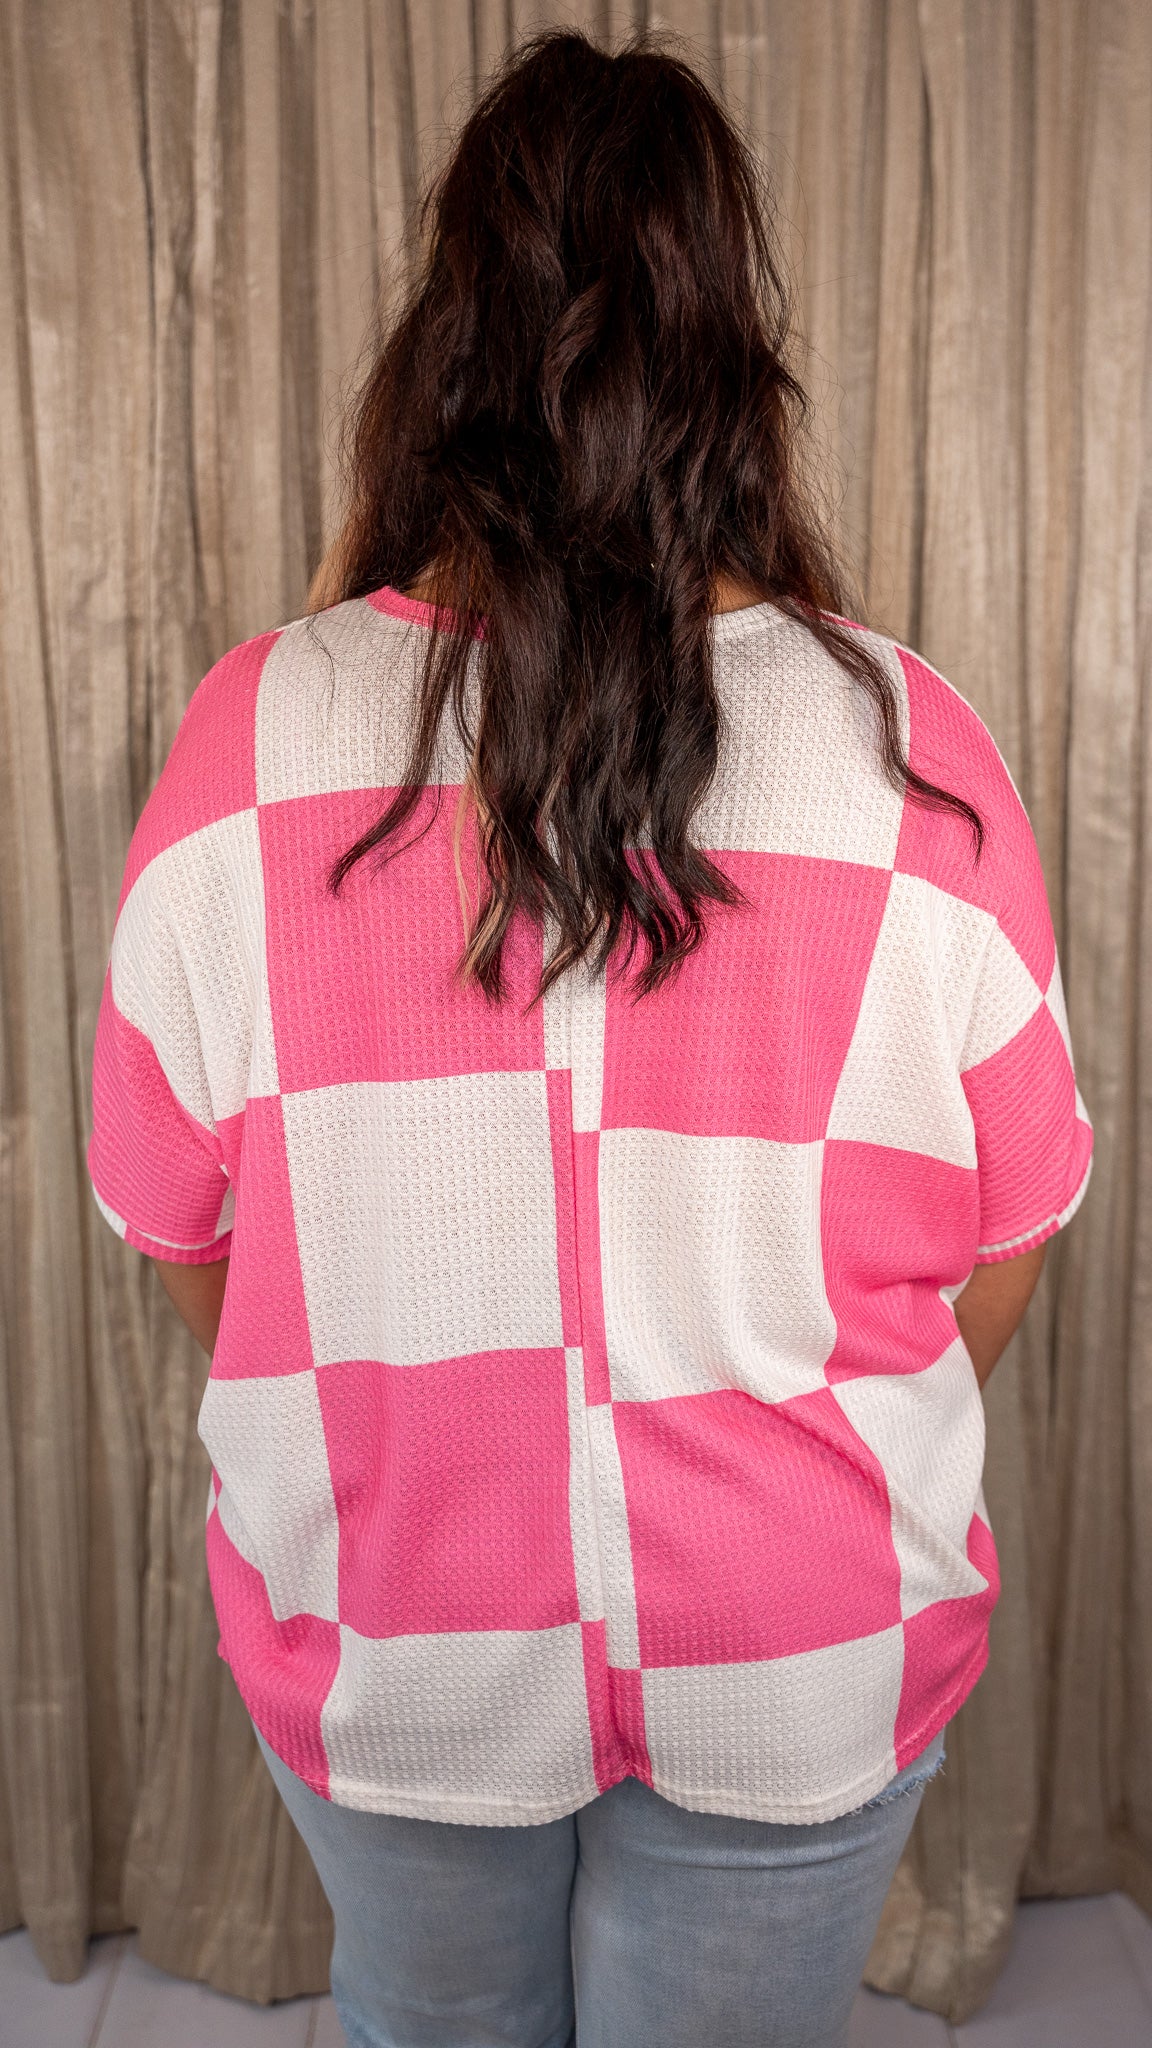 It's A Breeze Pink Checkered Top